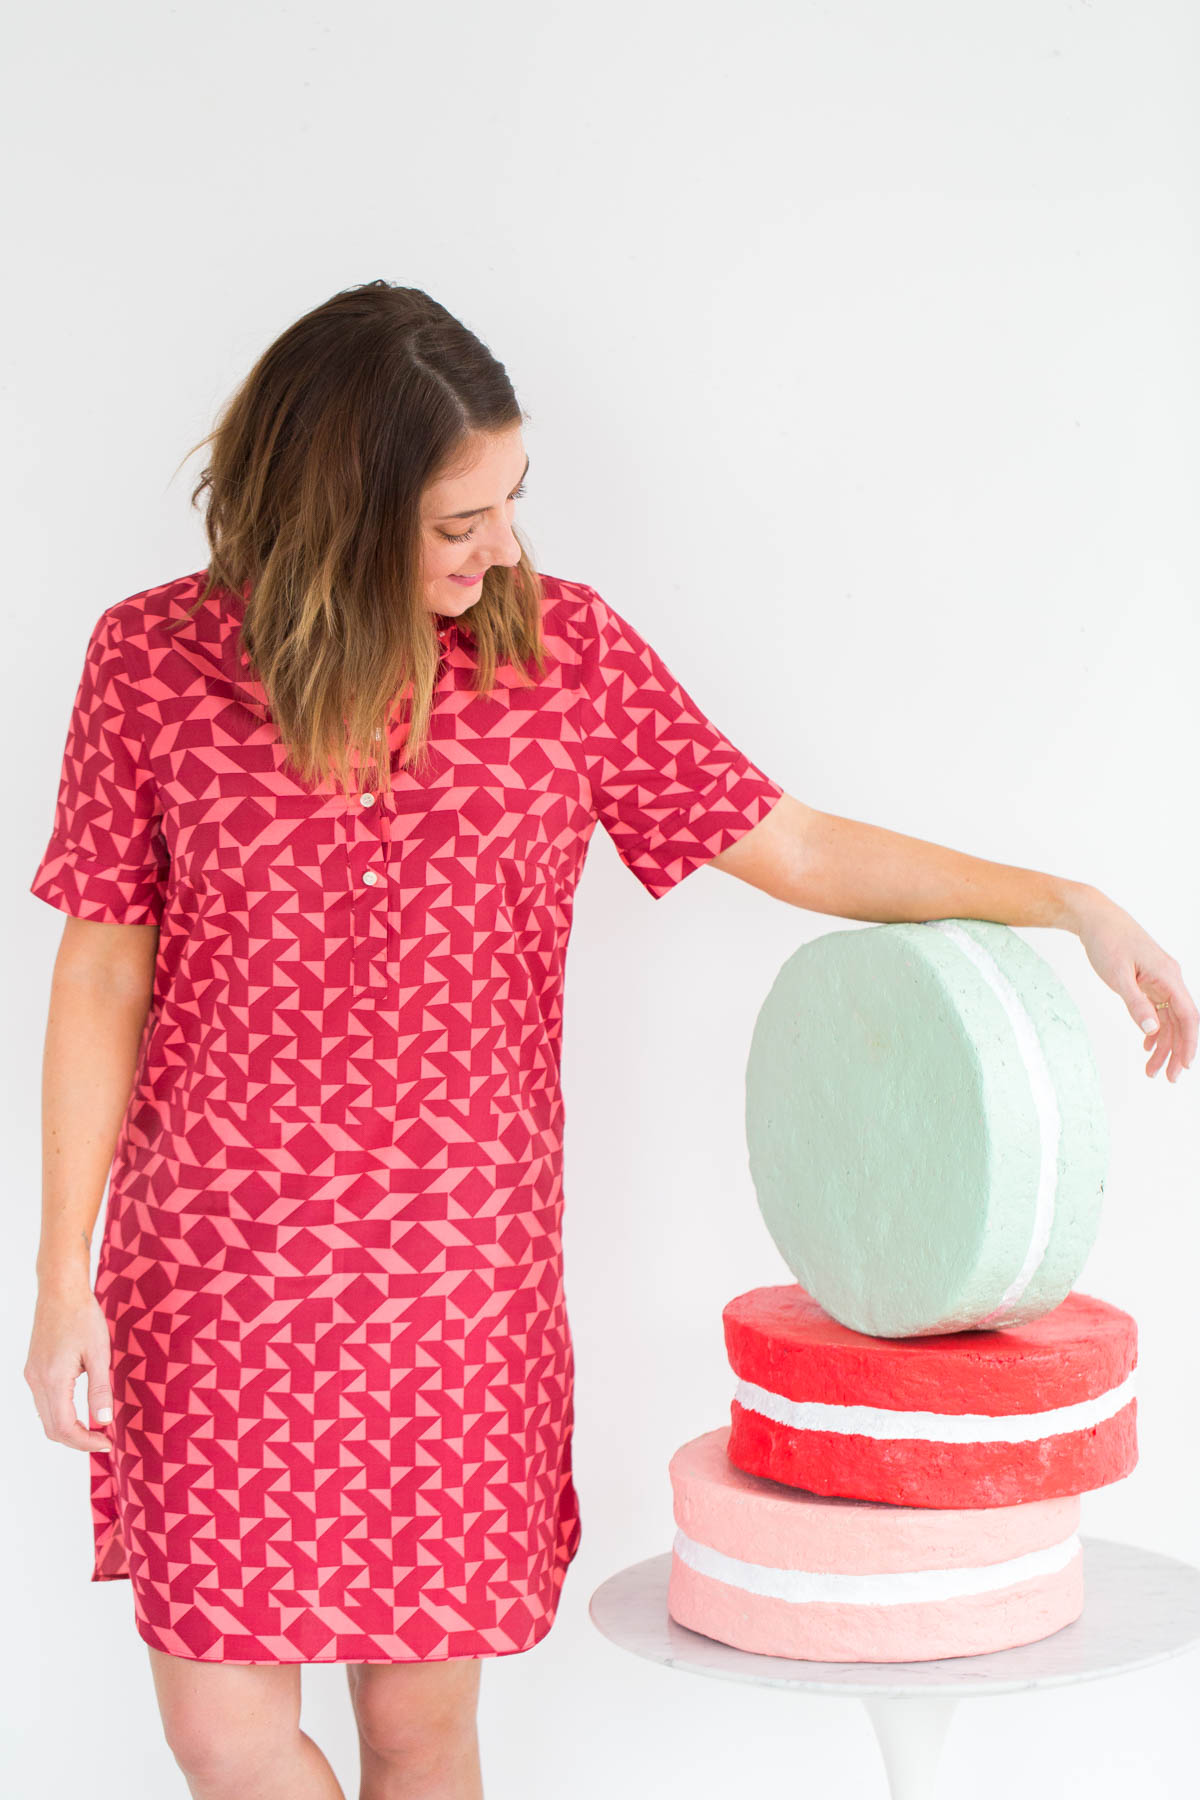 Jumbo DIY Paper Mache Macarons for the win! by lifestyle blogger Ashley Rose of Sugar & Cloth - Houston, TX